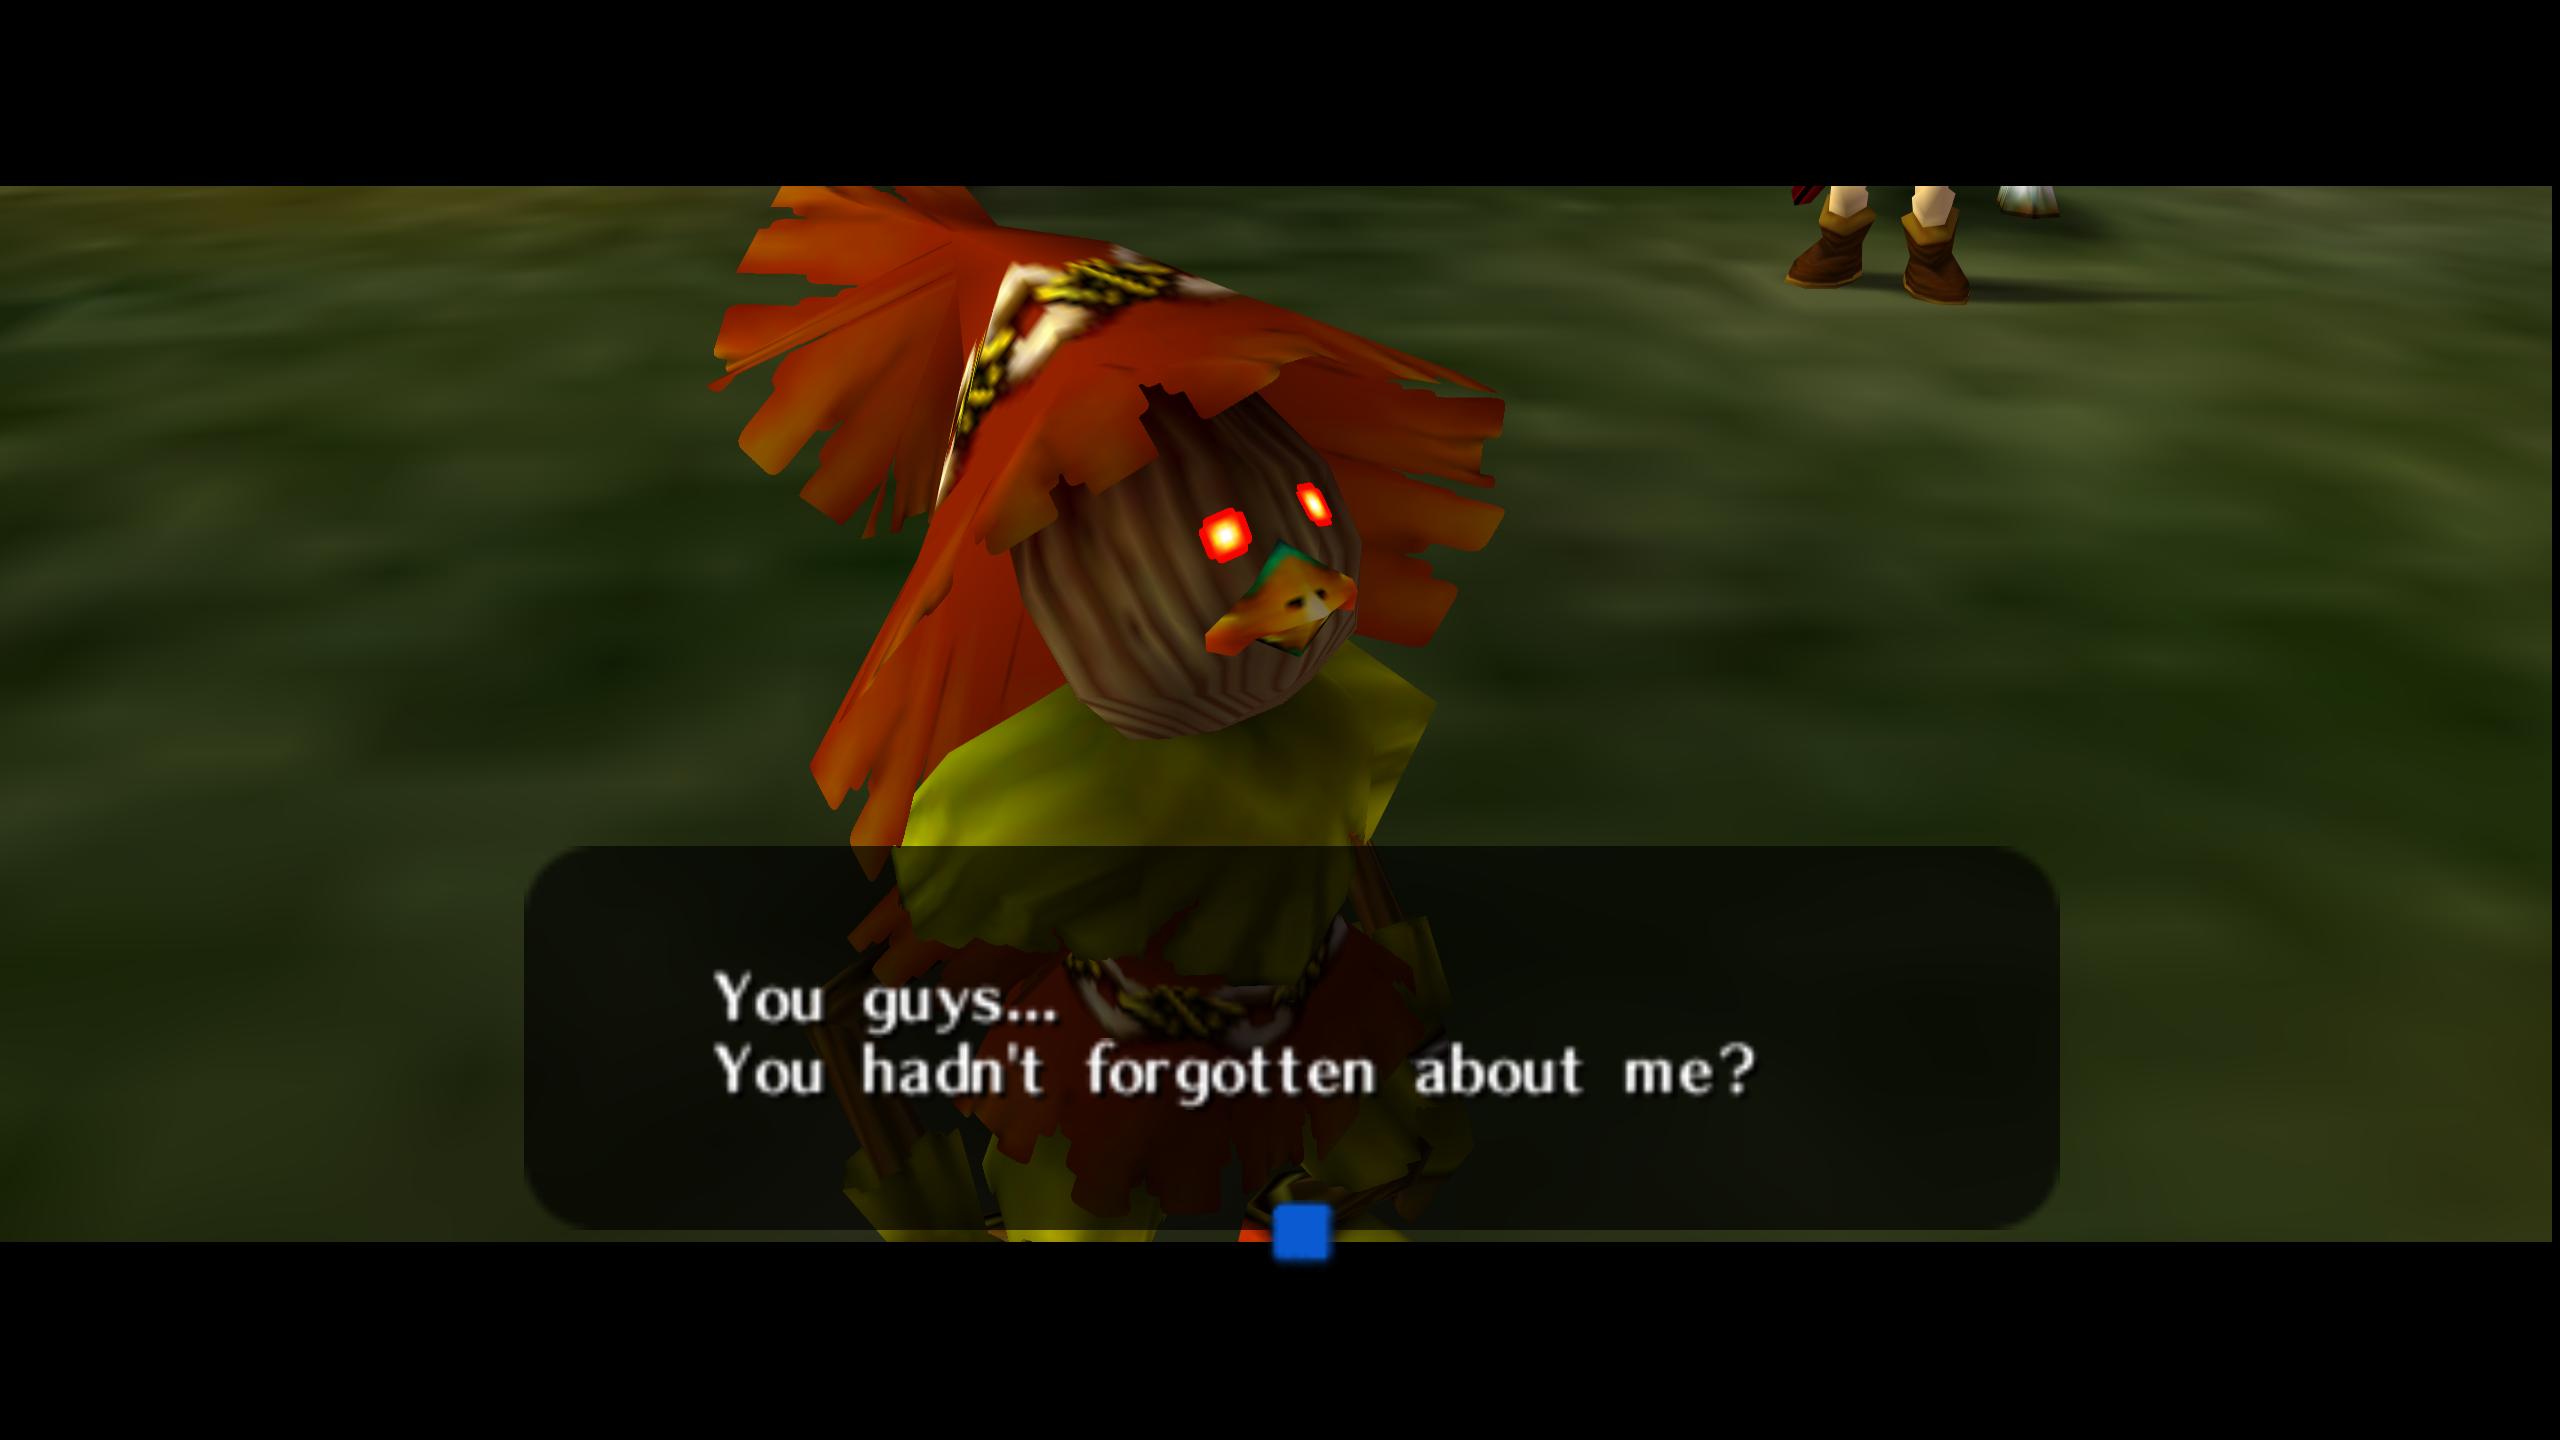 Majoras Mask Quote Give Him A Mask And He Will Tell You The Truth The Public Medievalist Majora S Mask Deluxe Game Cosplay Mask Halloween Fancy Dress Costume Props Trends In Youtube